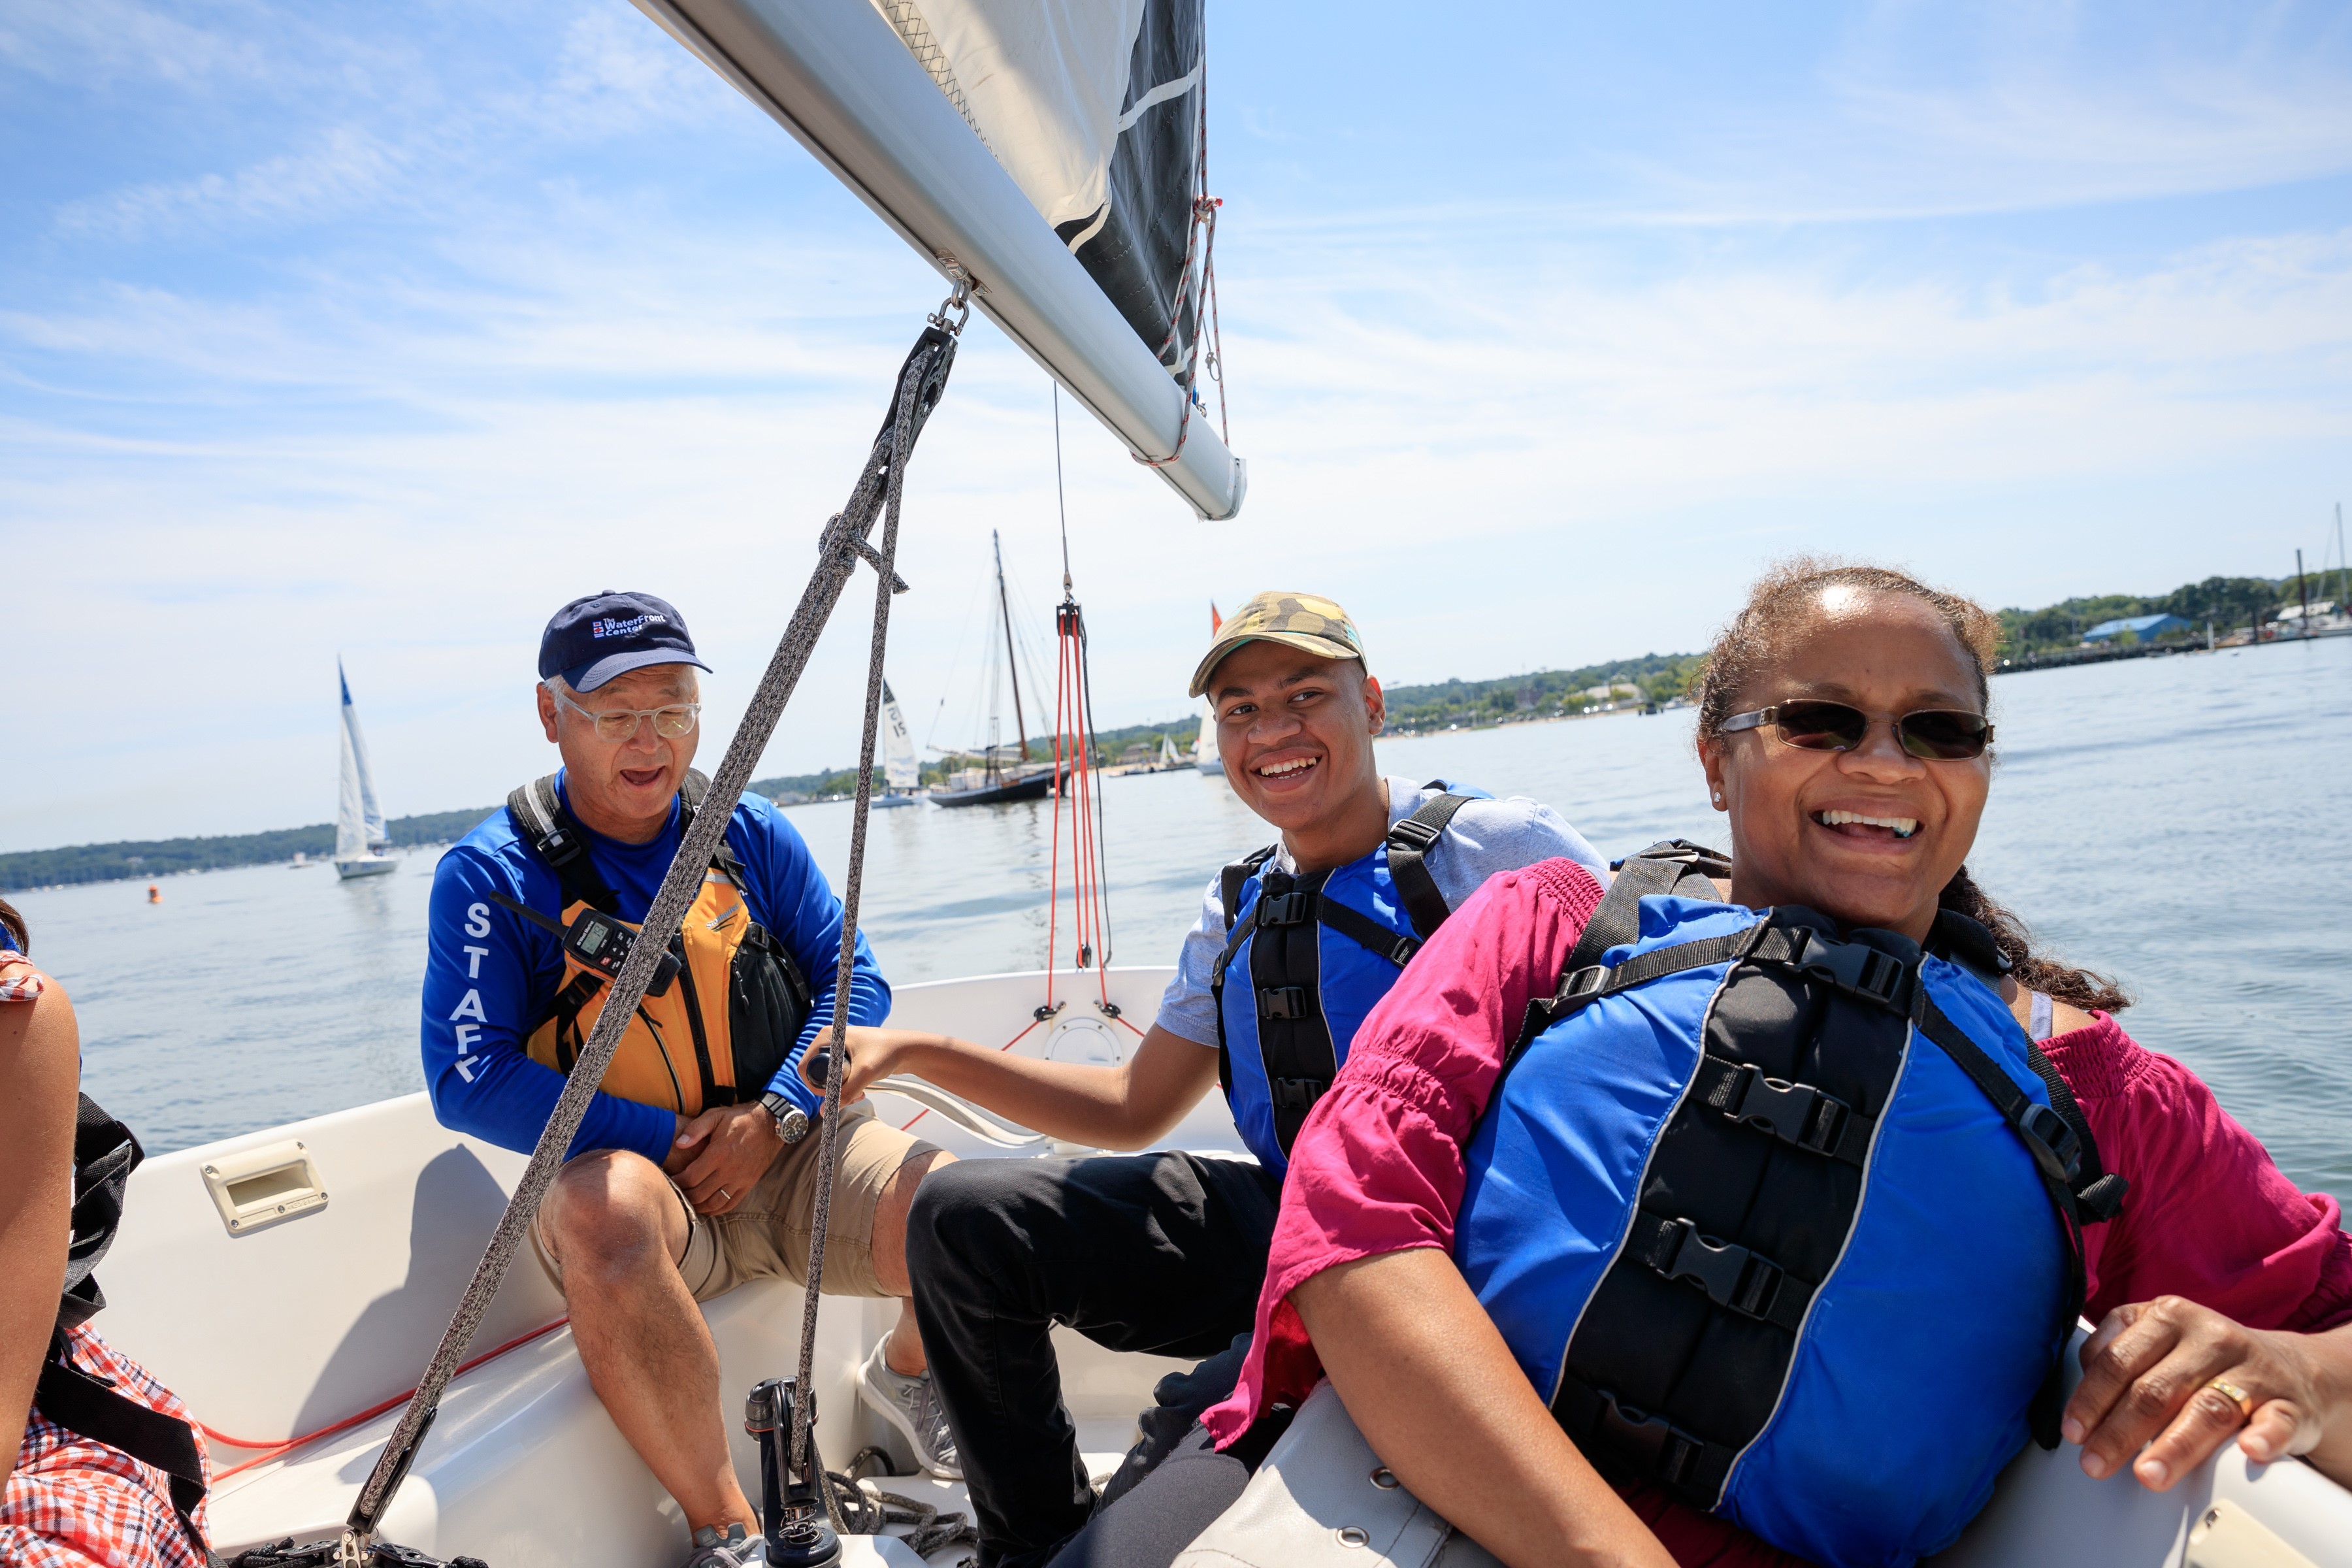 Group of smiling adults enjoy a beautiful day sailing on the bay